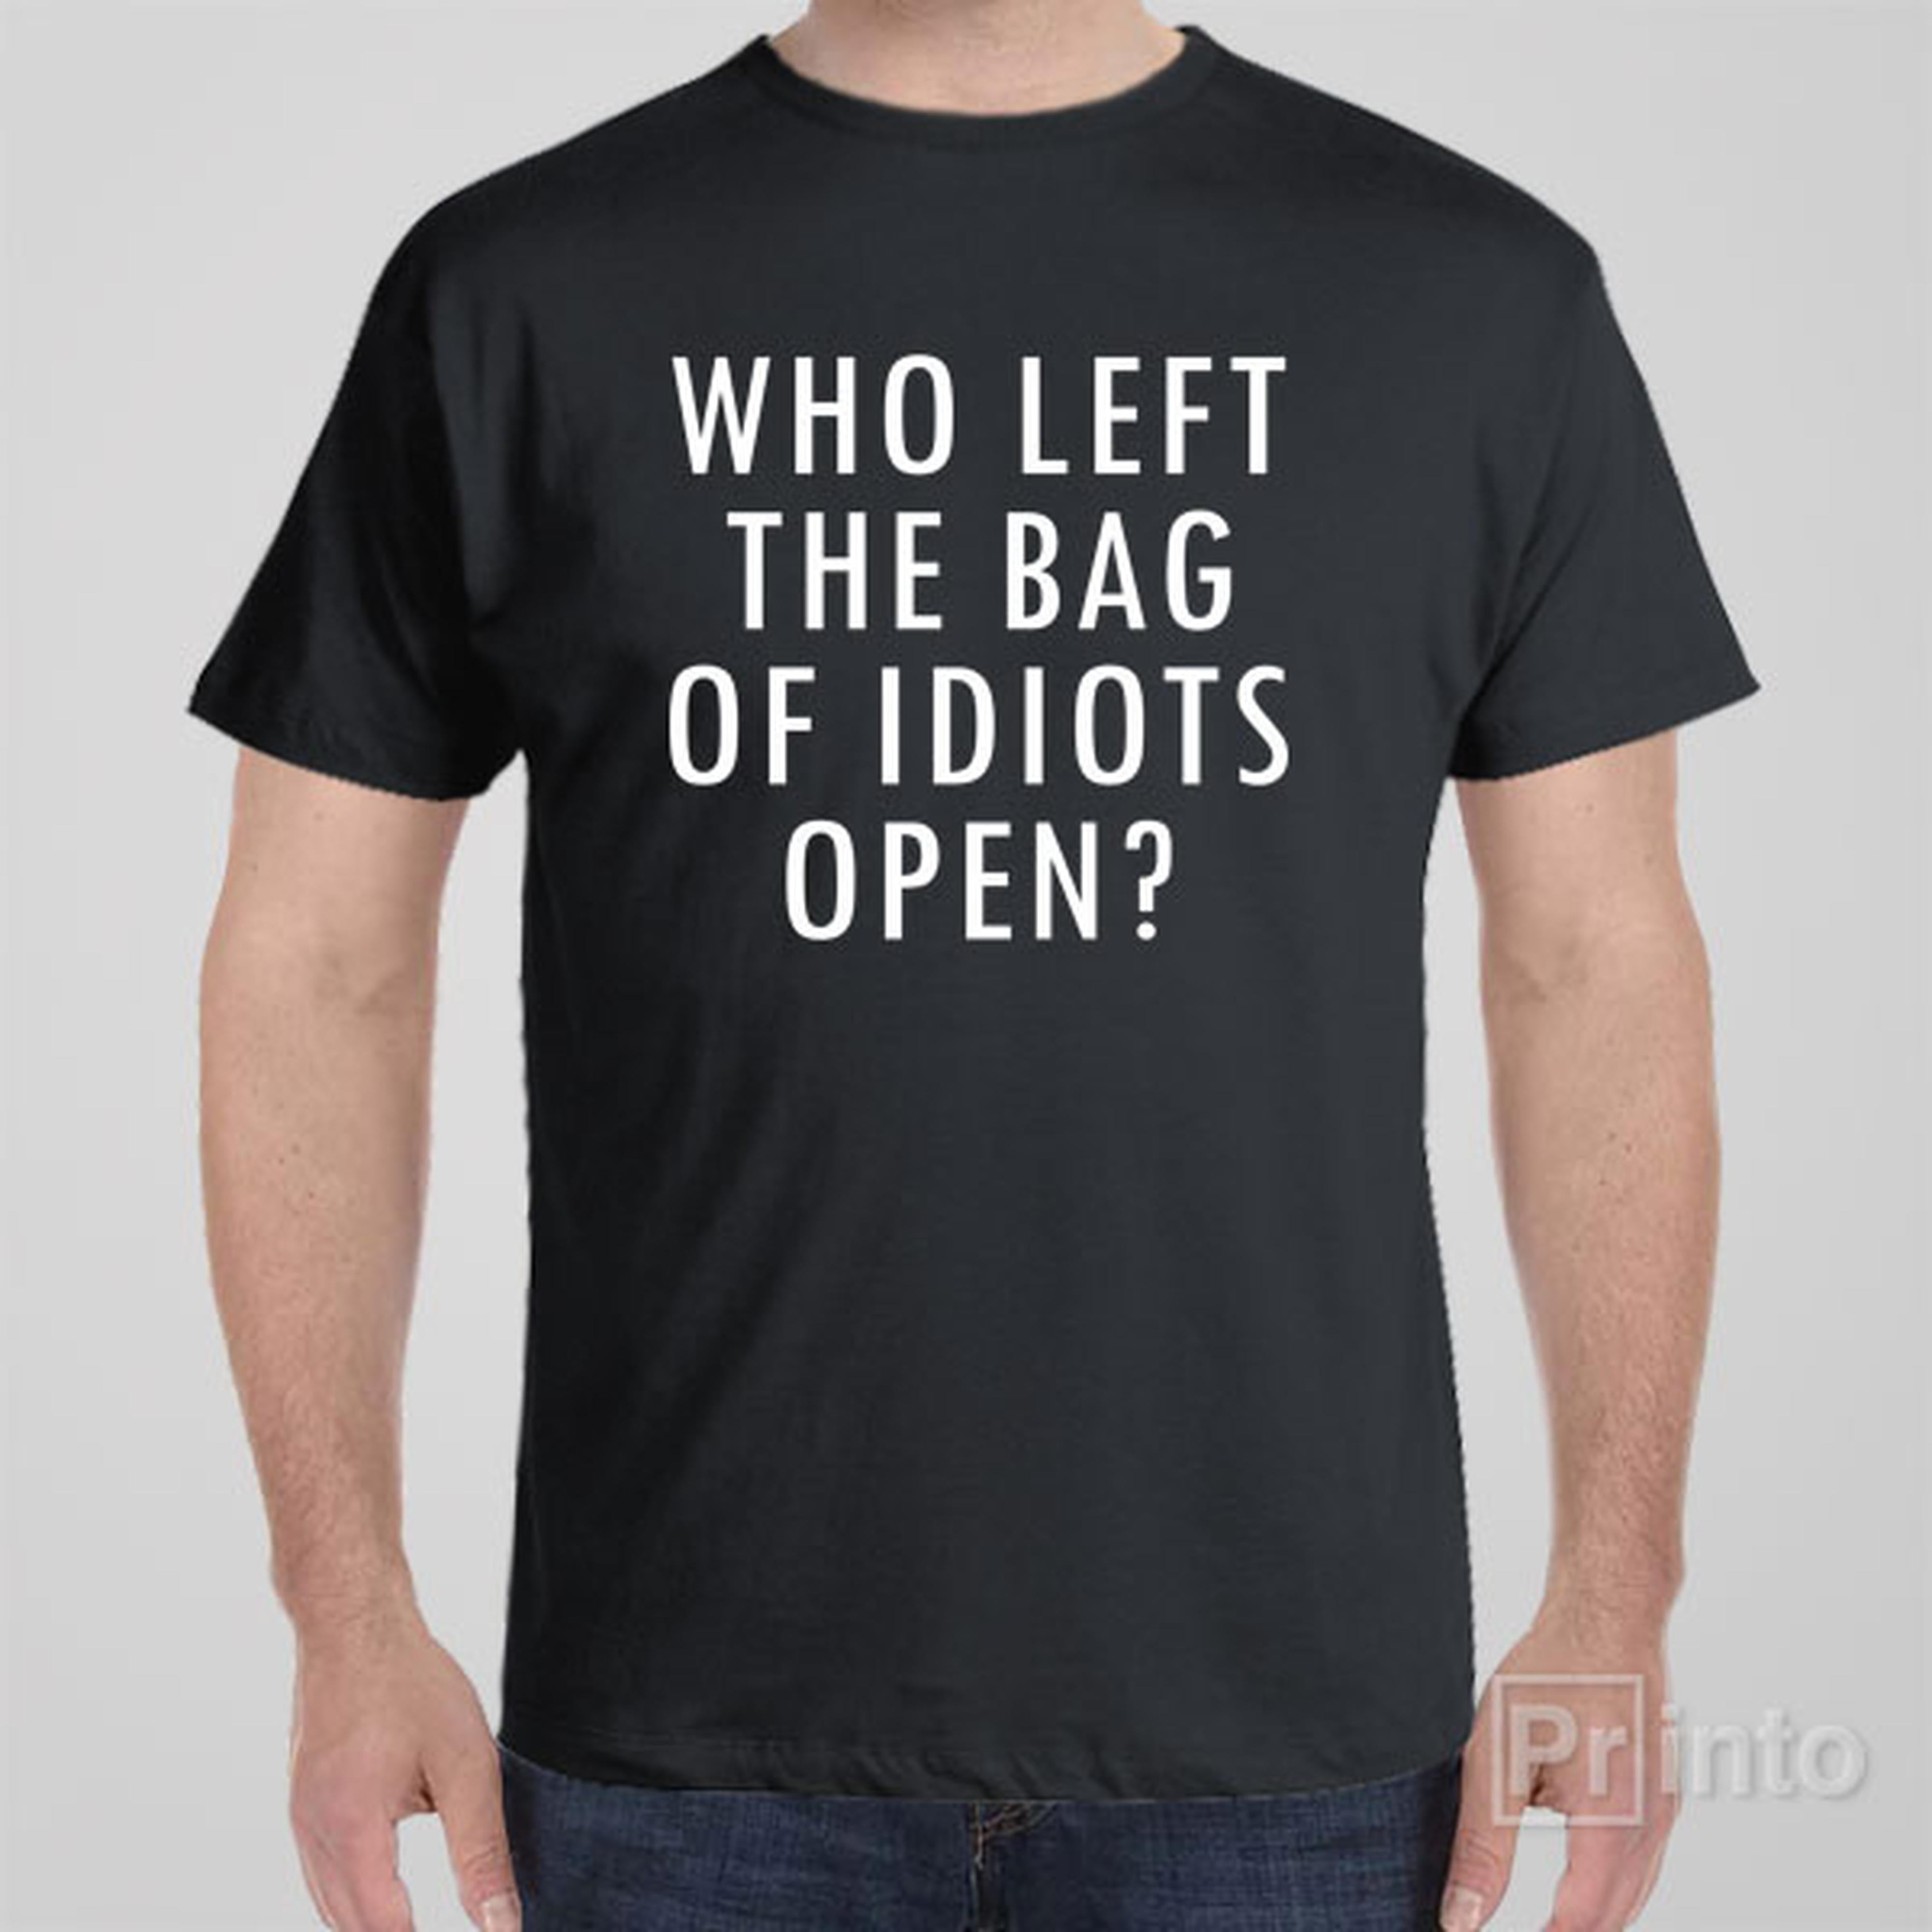 who-left-the-bag-of-idiots-open-t-shirt